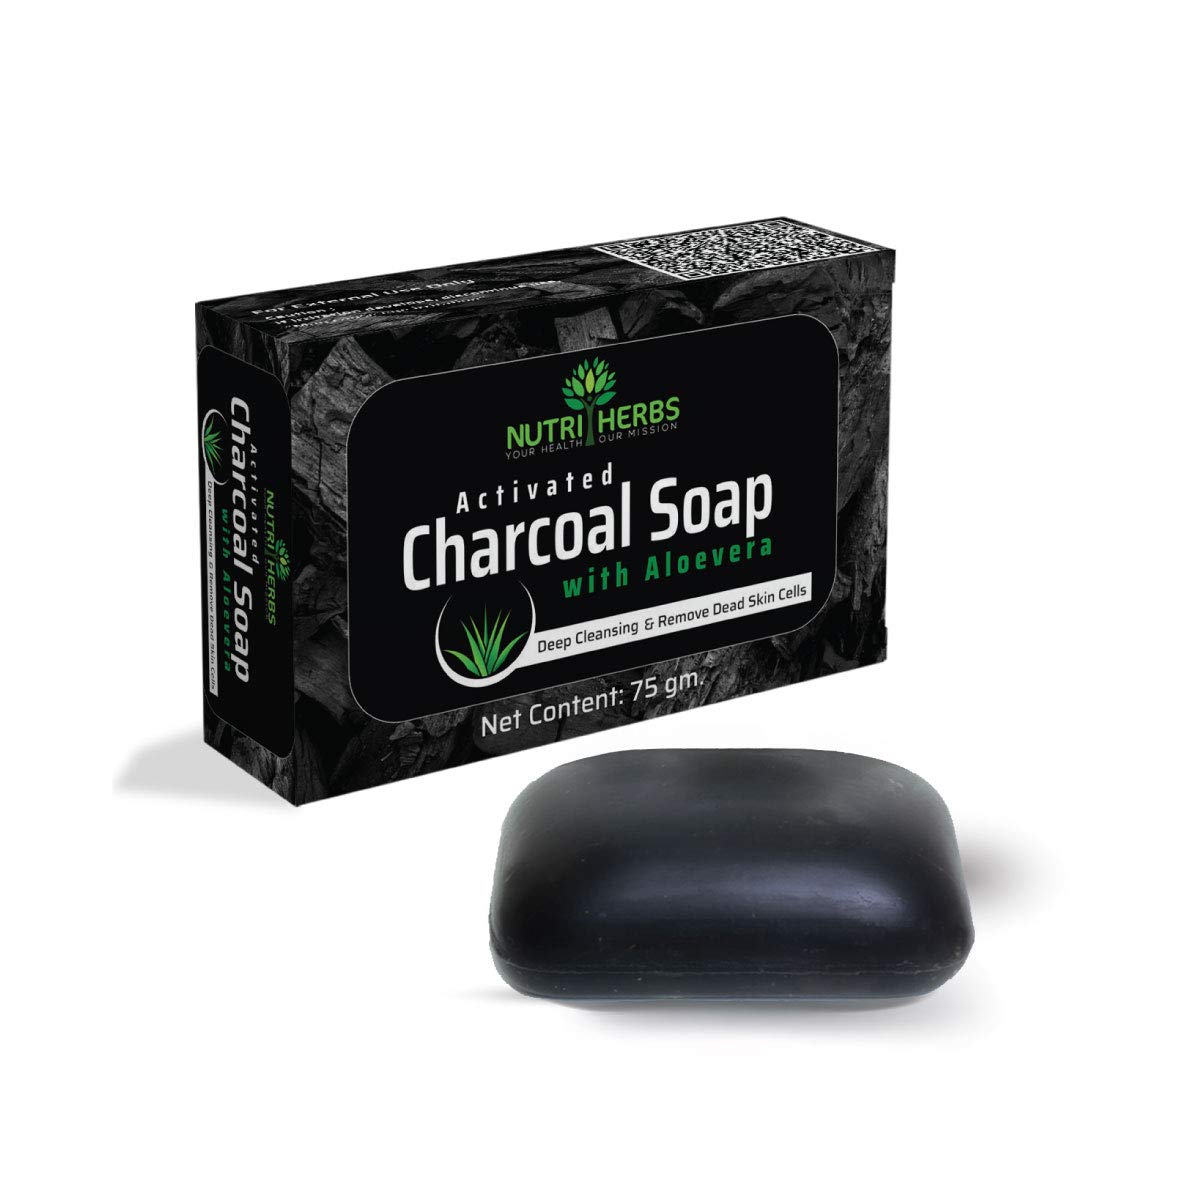 What Makes Using Neem And Charcoal Soap Are Effective 2021?